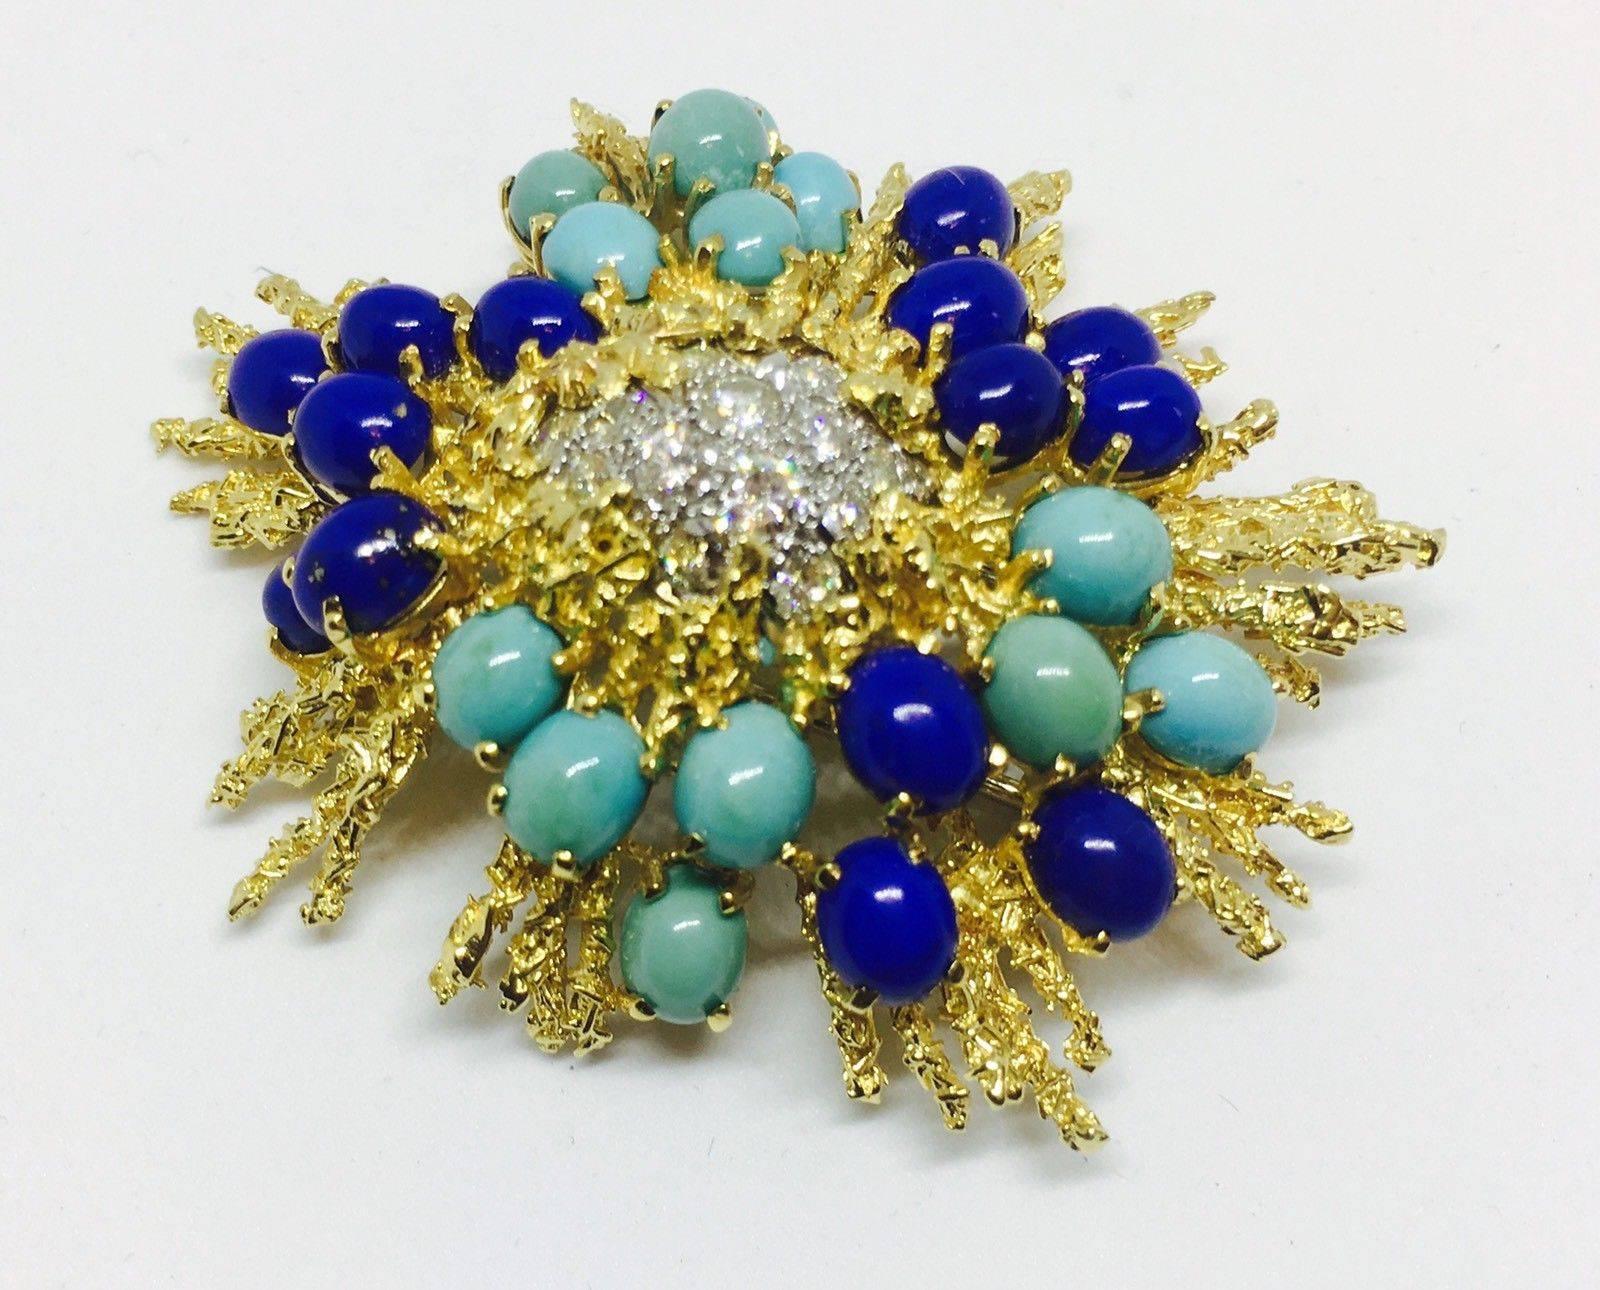 Impressive 1950s Turquoise Lapis Diamond 18k Gold Brooch / Pin / Necklace Pendant by Designer George Schuler (who designed and manufactured jewelry pieces for jewelry houses such as Tiffany, Cartier, and Neiman Marcus).  Consisting of an 18-karat